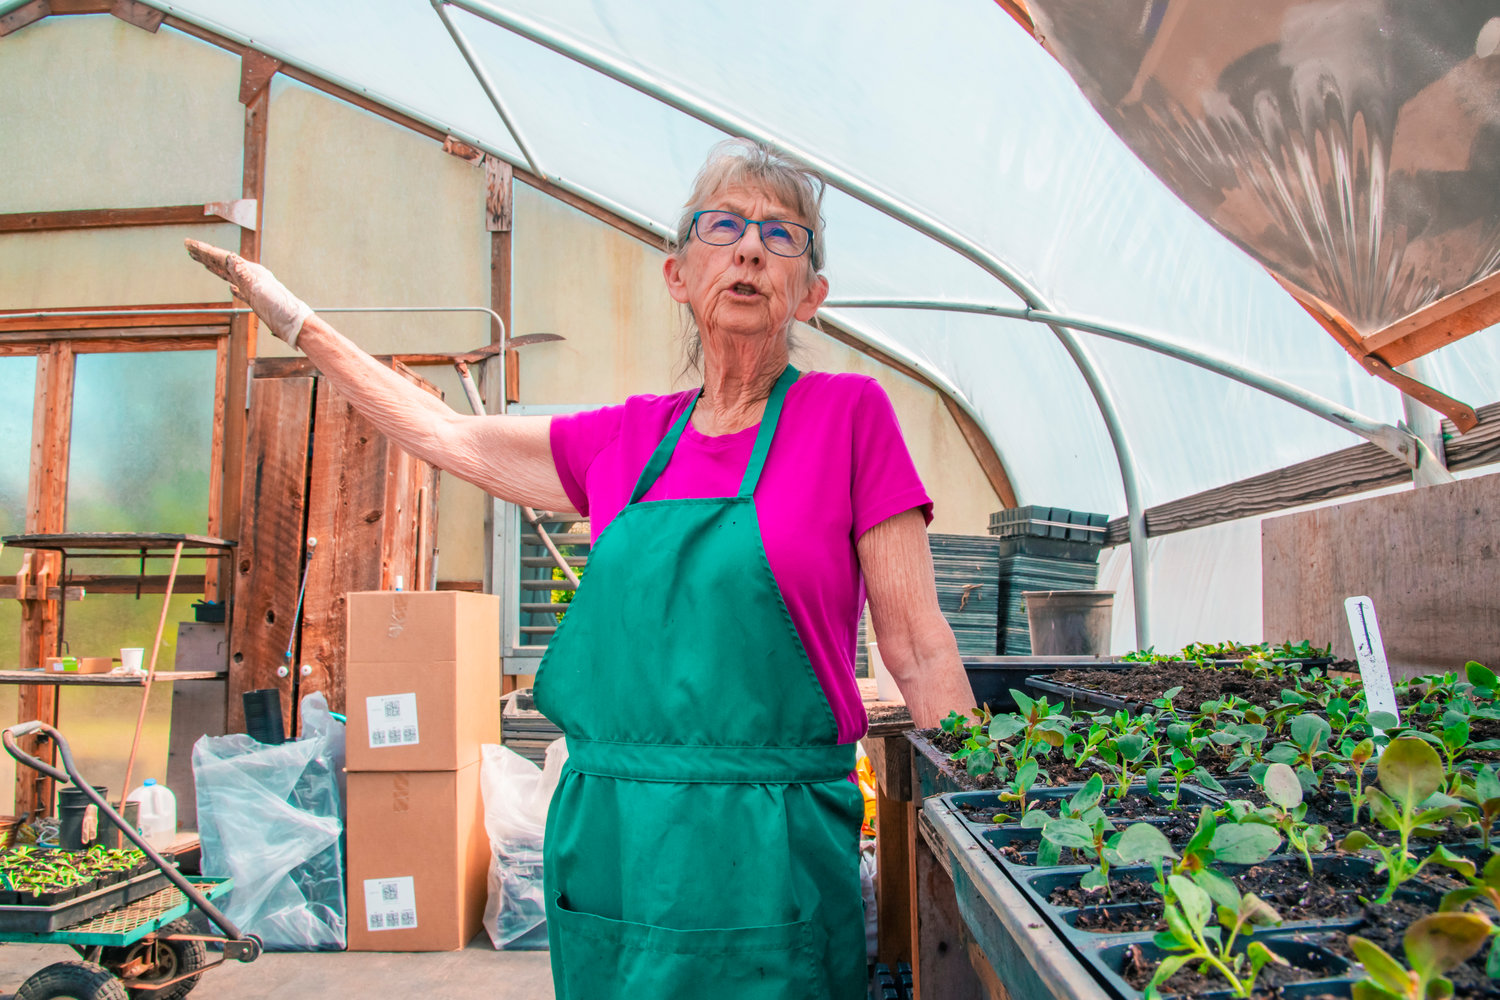 Thelma Hauge talks about working in the greenhouse at the Blueberry Hill Nursery Tuesday afternoon in Vader.